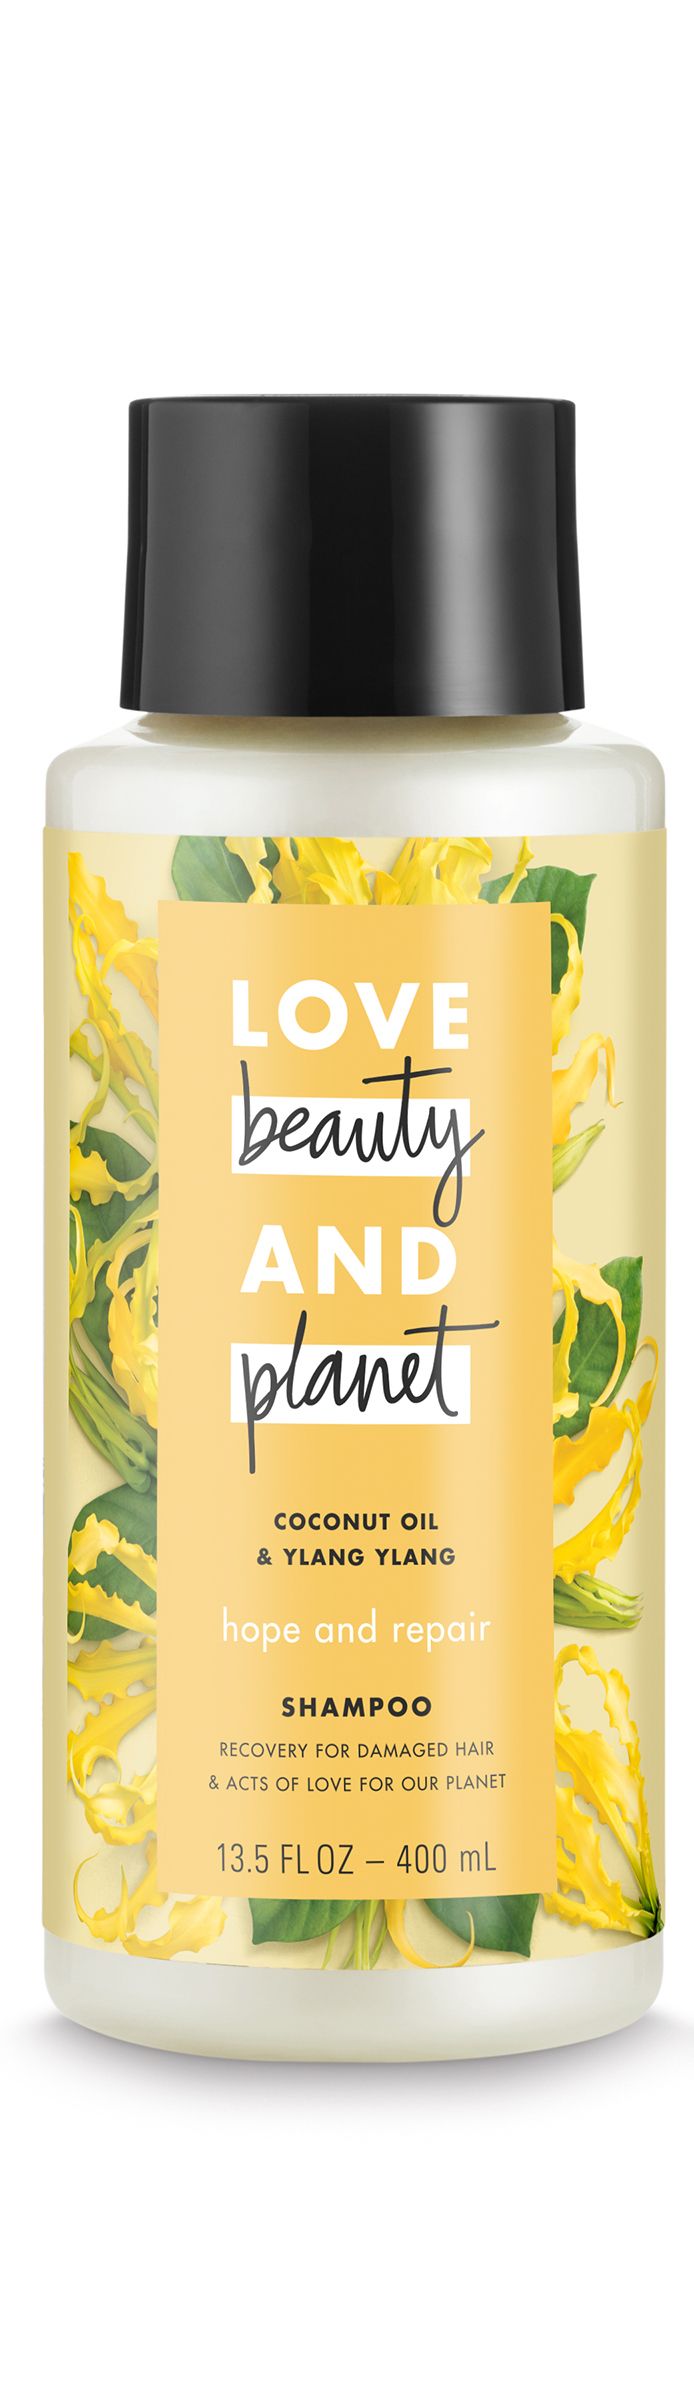 this eco beauty just hit drugstores & everything is under $10